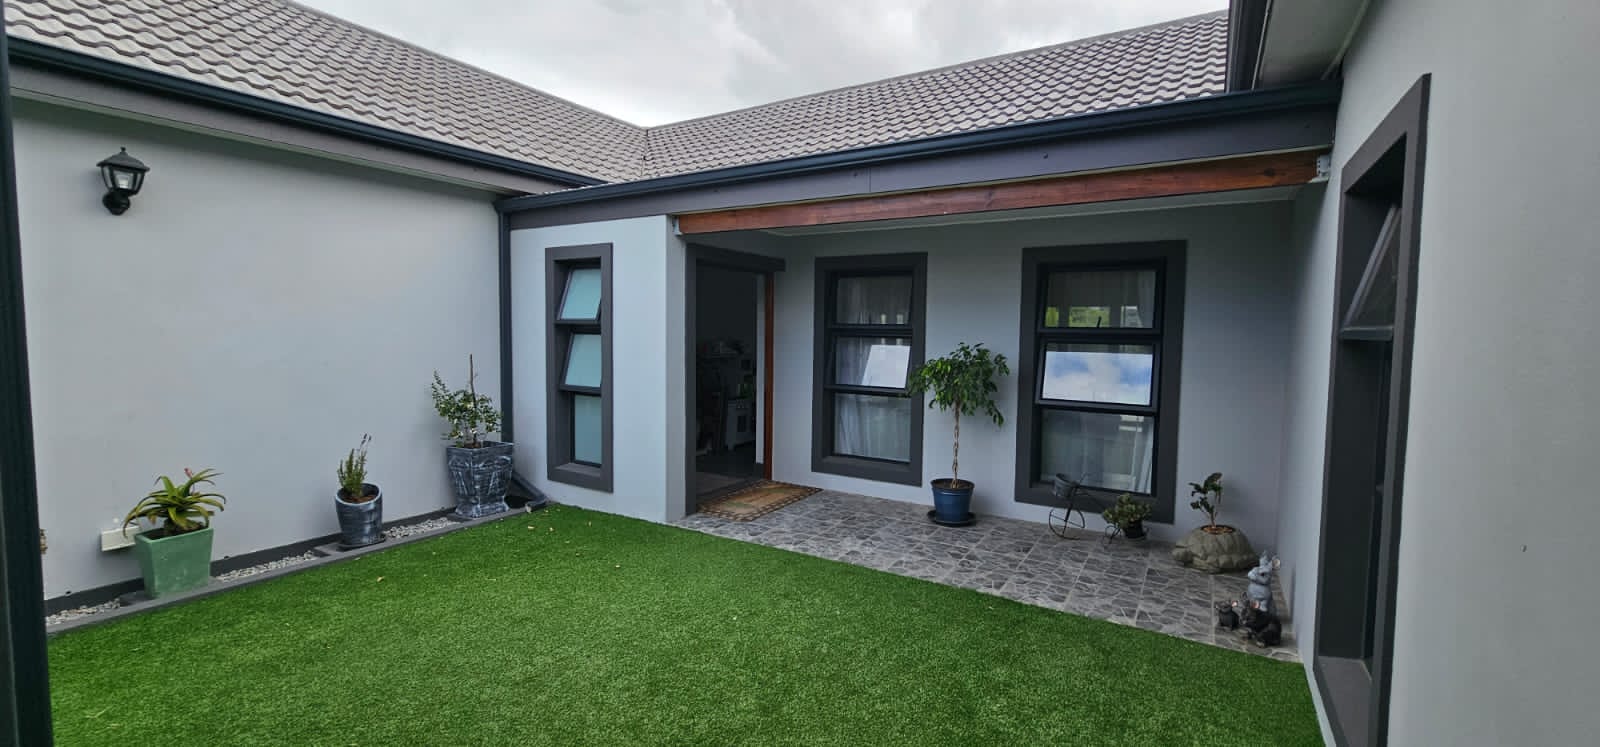 4 Bedroom Property for Sale in Blue Mountain Village Western Cape